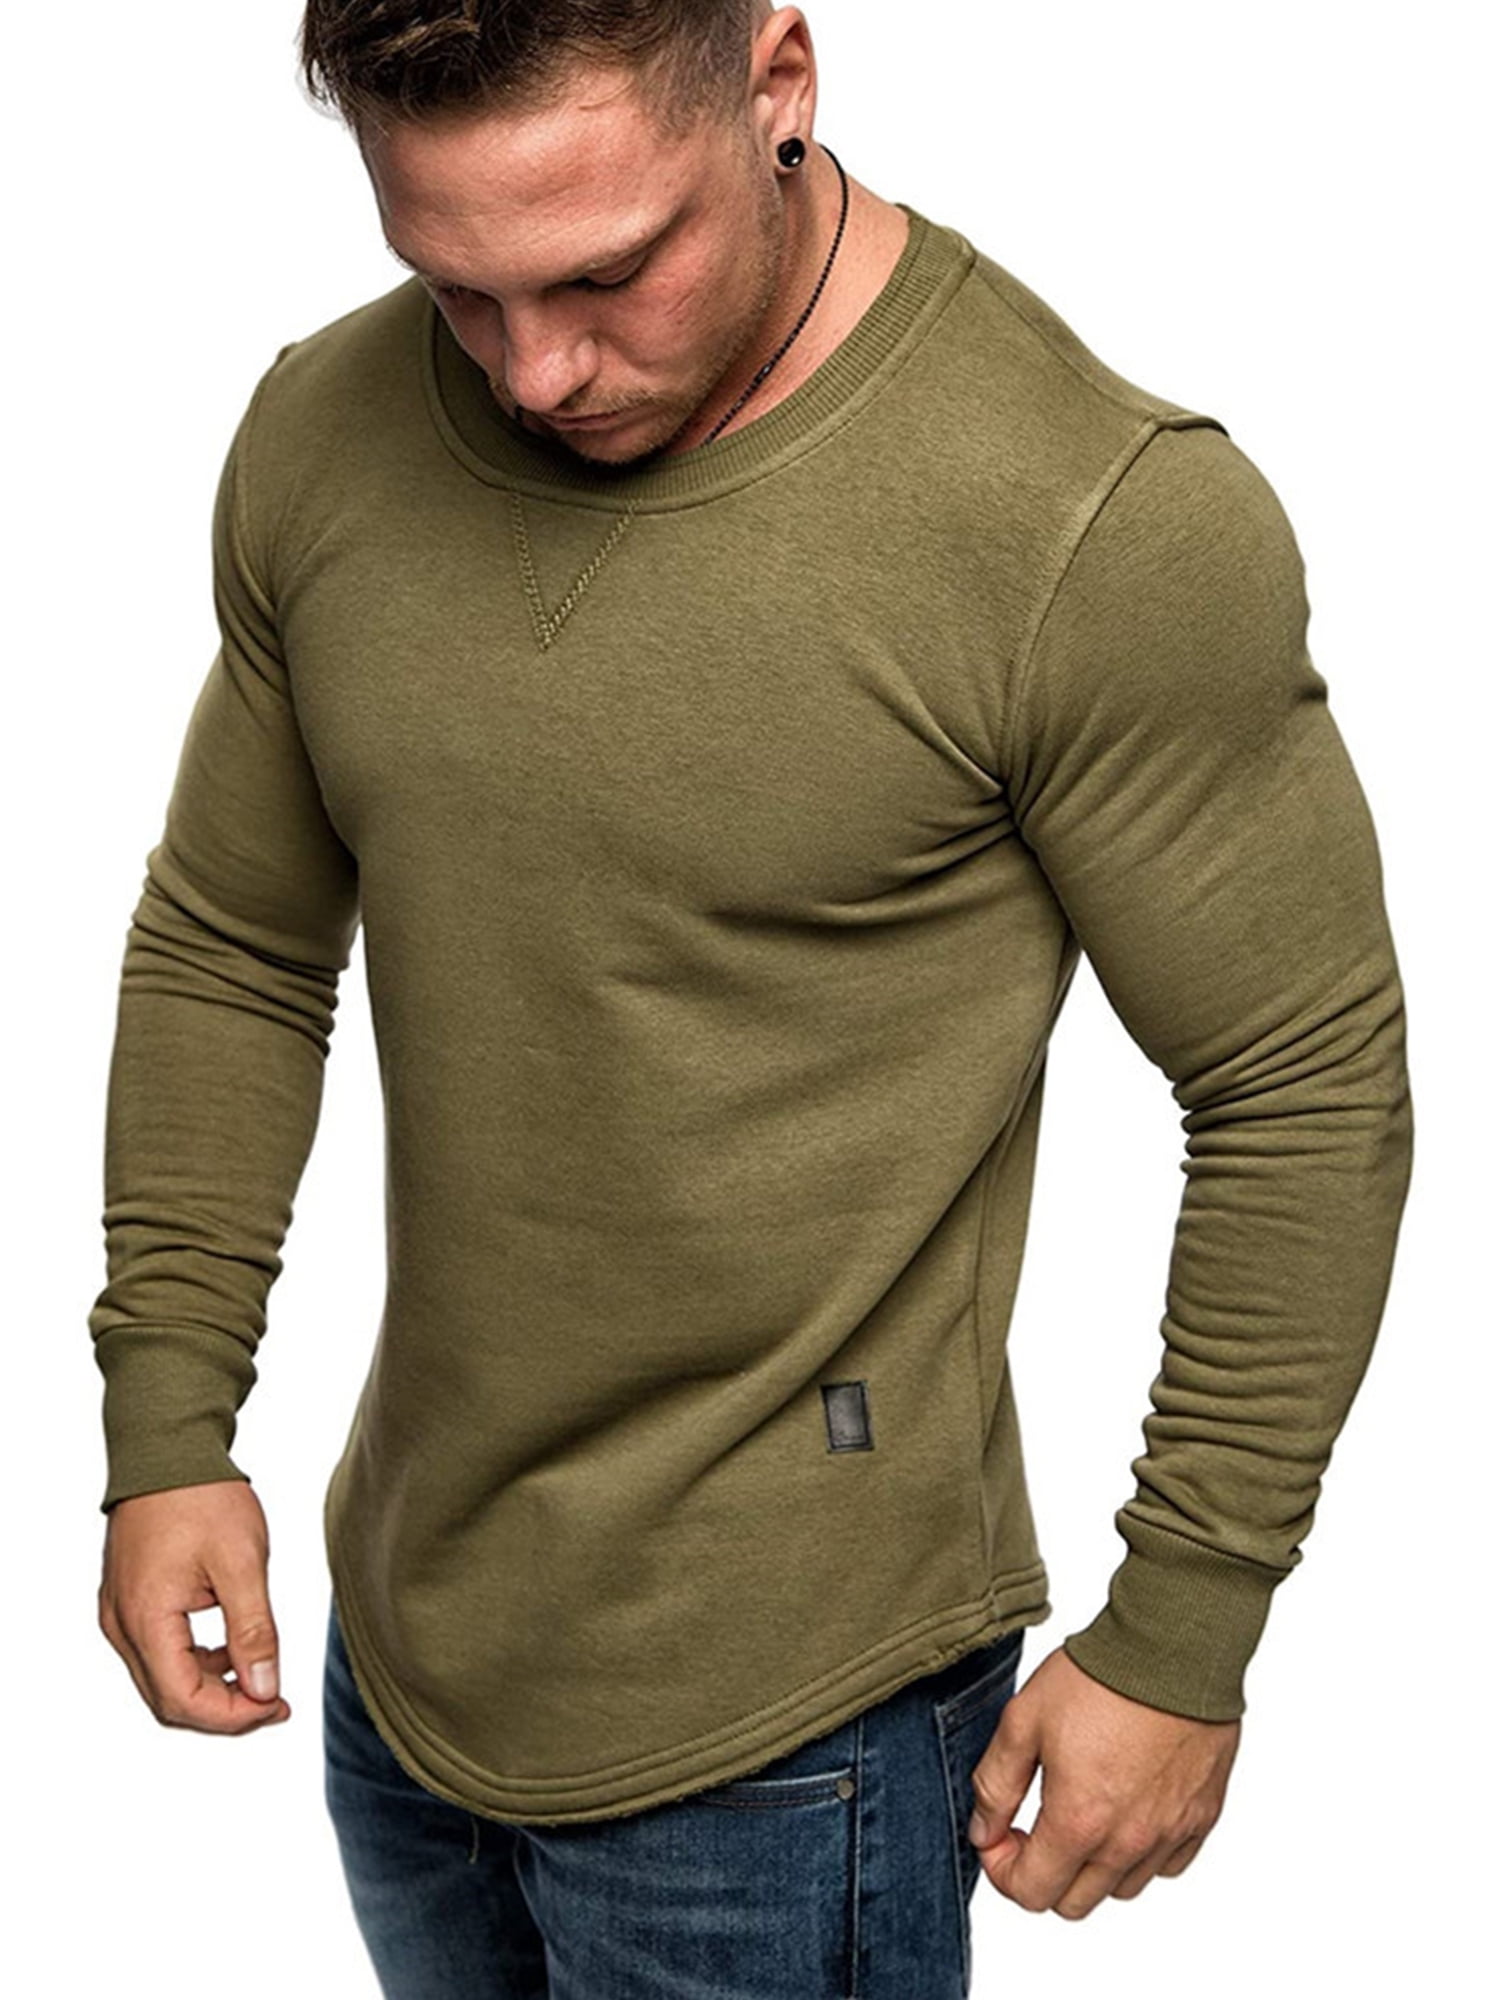 Wodstyle - Mens Muscle Long Sleeve T-Shirt Gym Sports ...